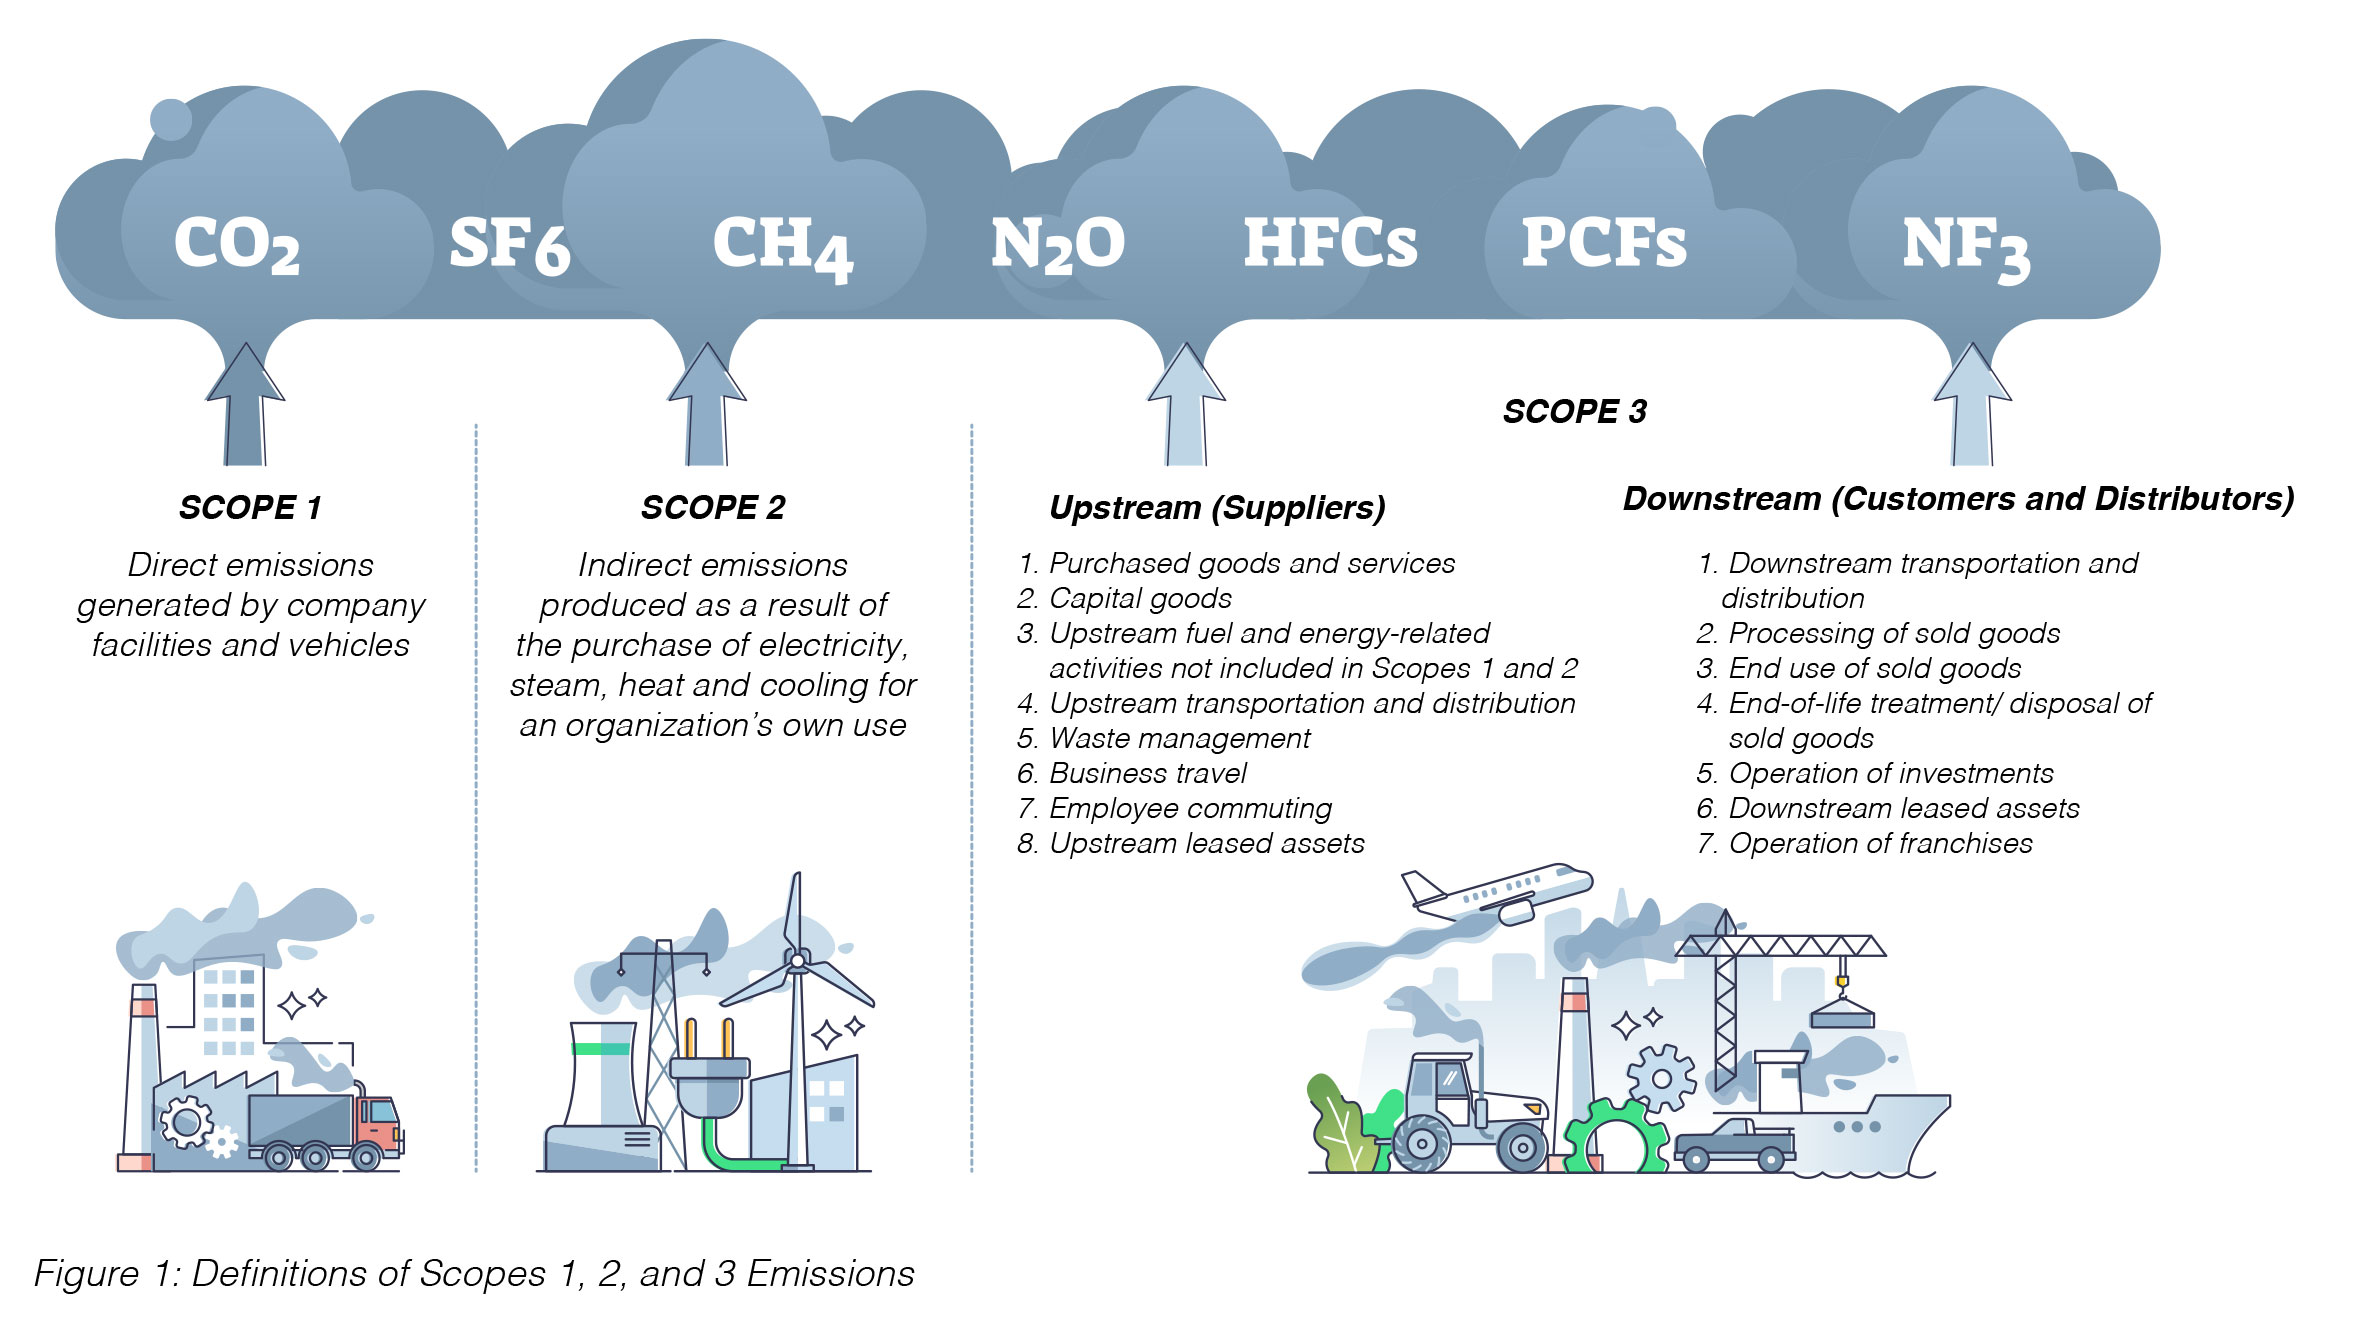 Definitions of Scopes 1, 2, and 3 Emissions